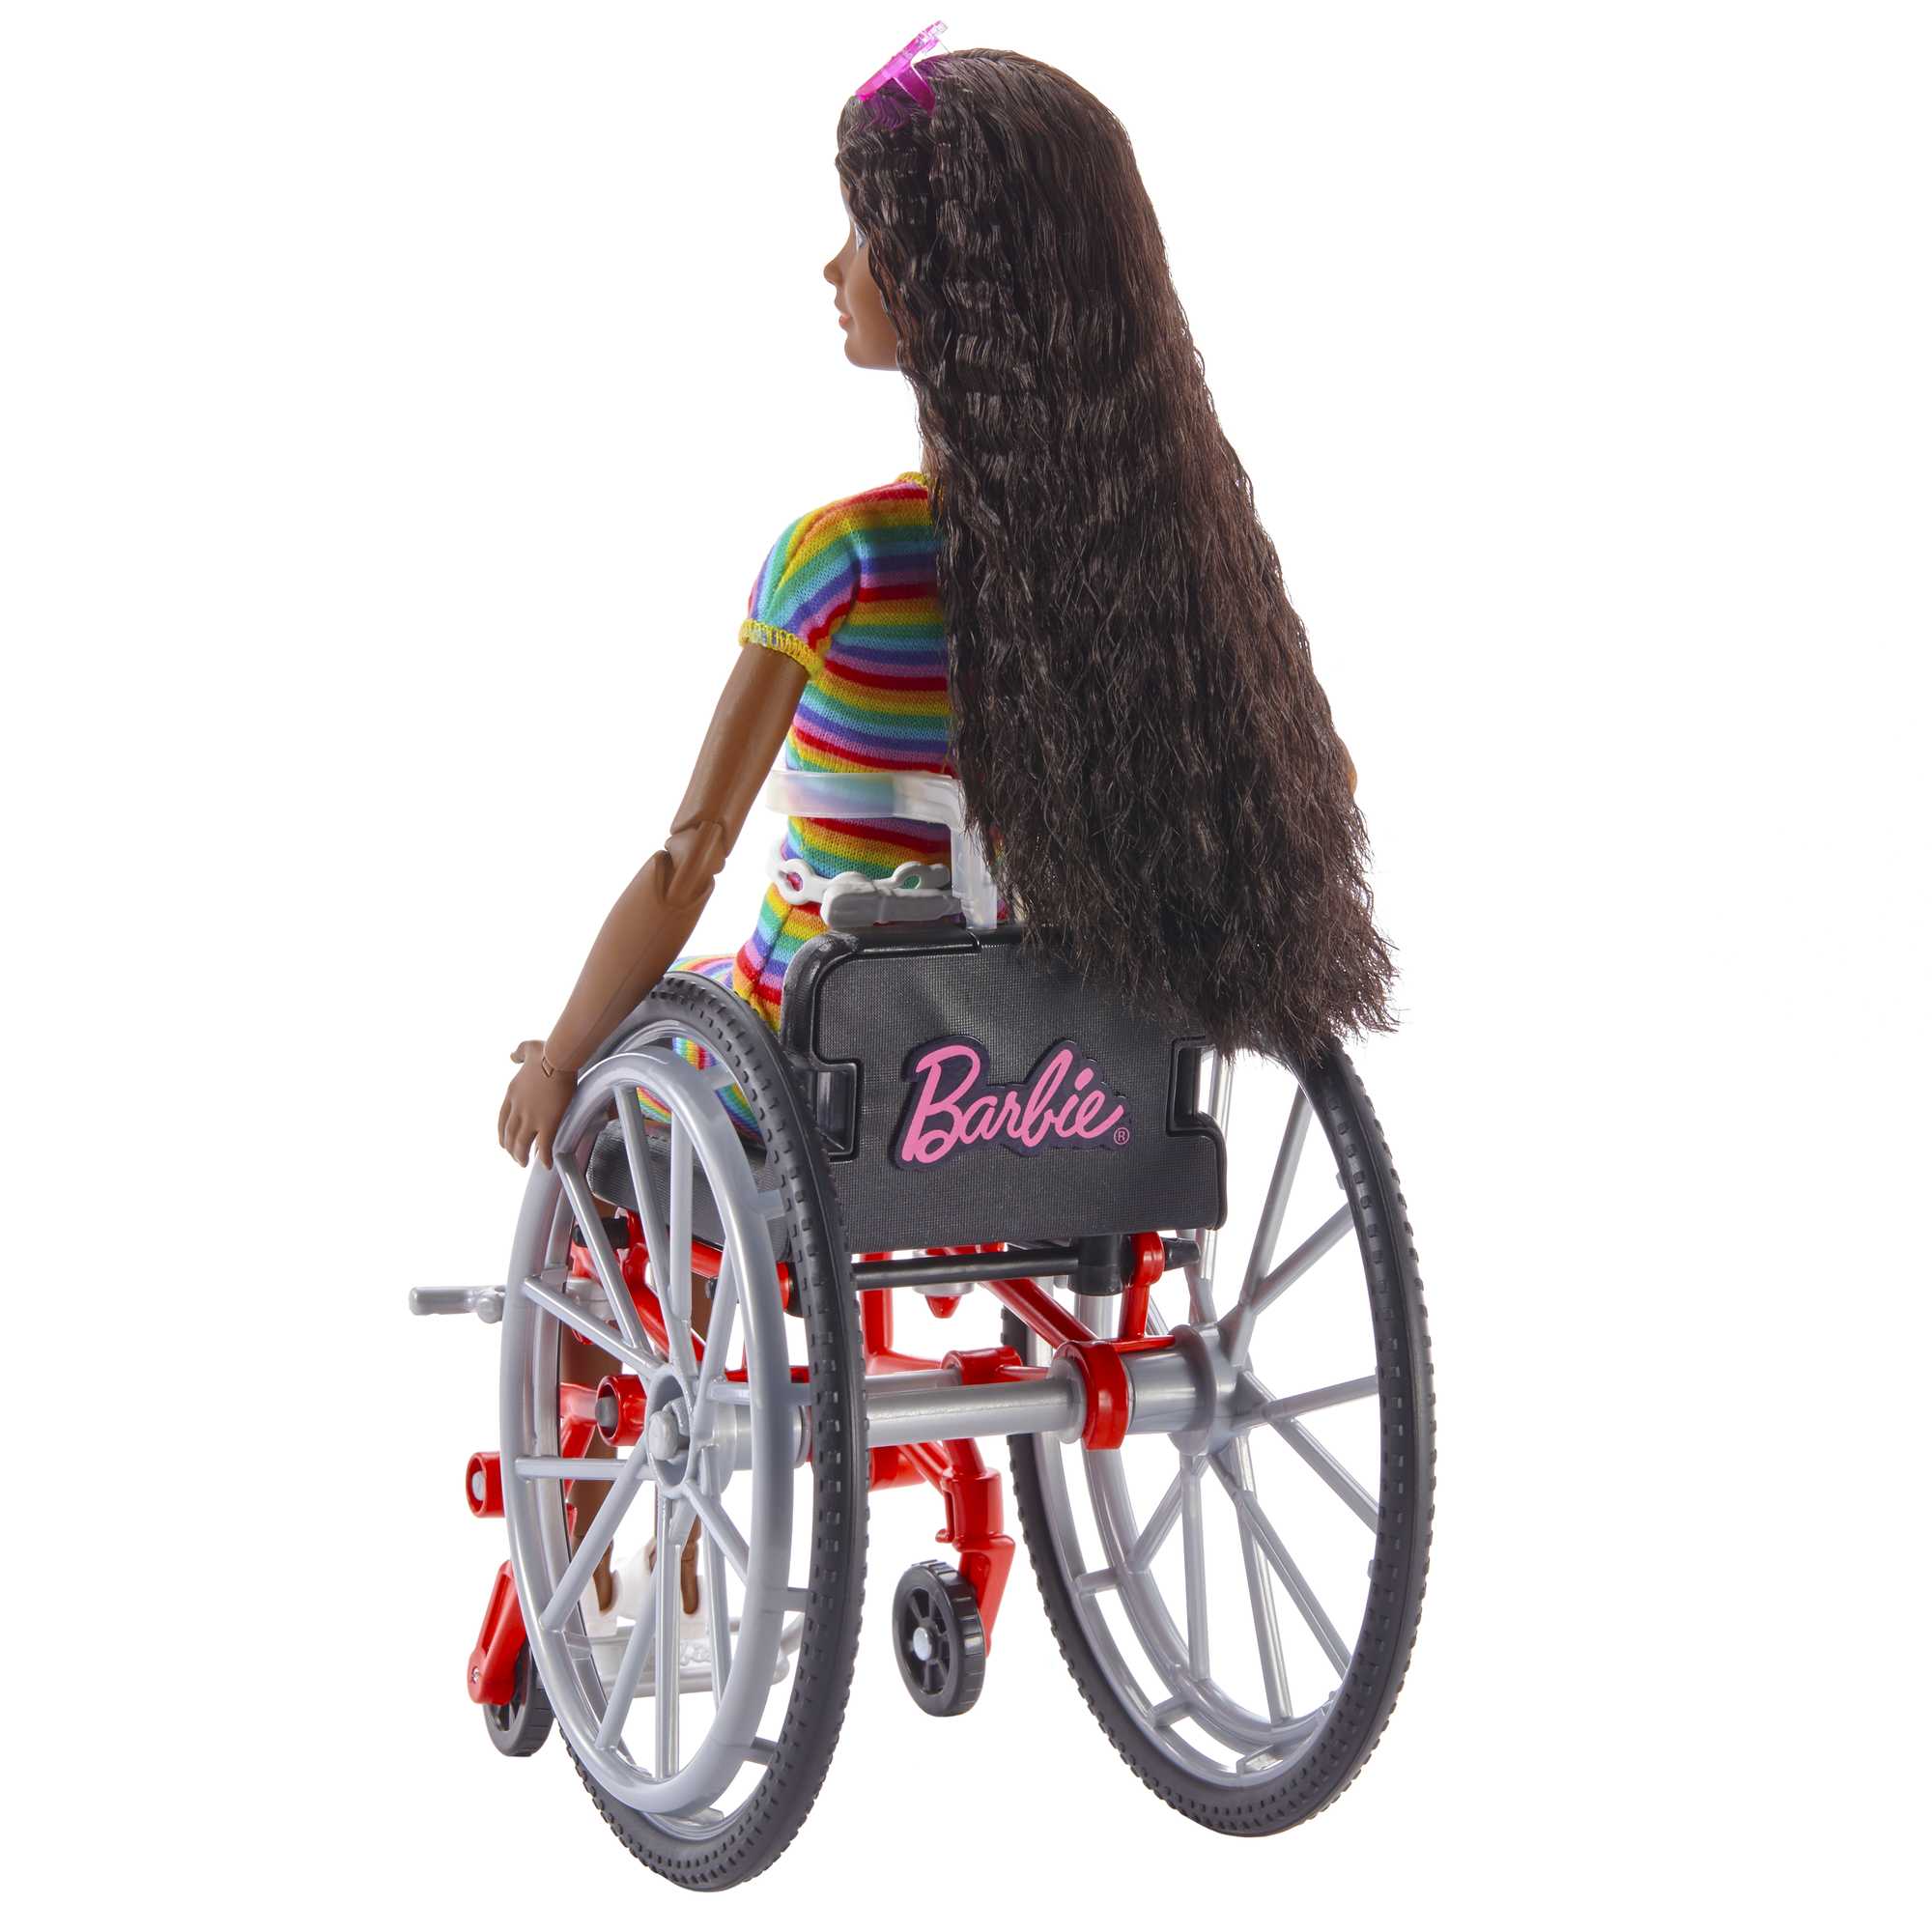 Barbie Doll And Accessory #166 | Mattel